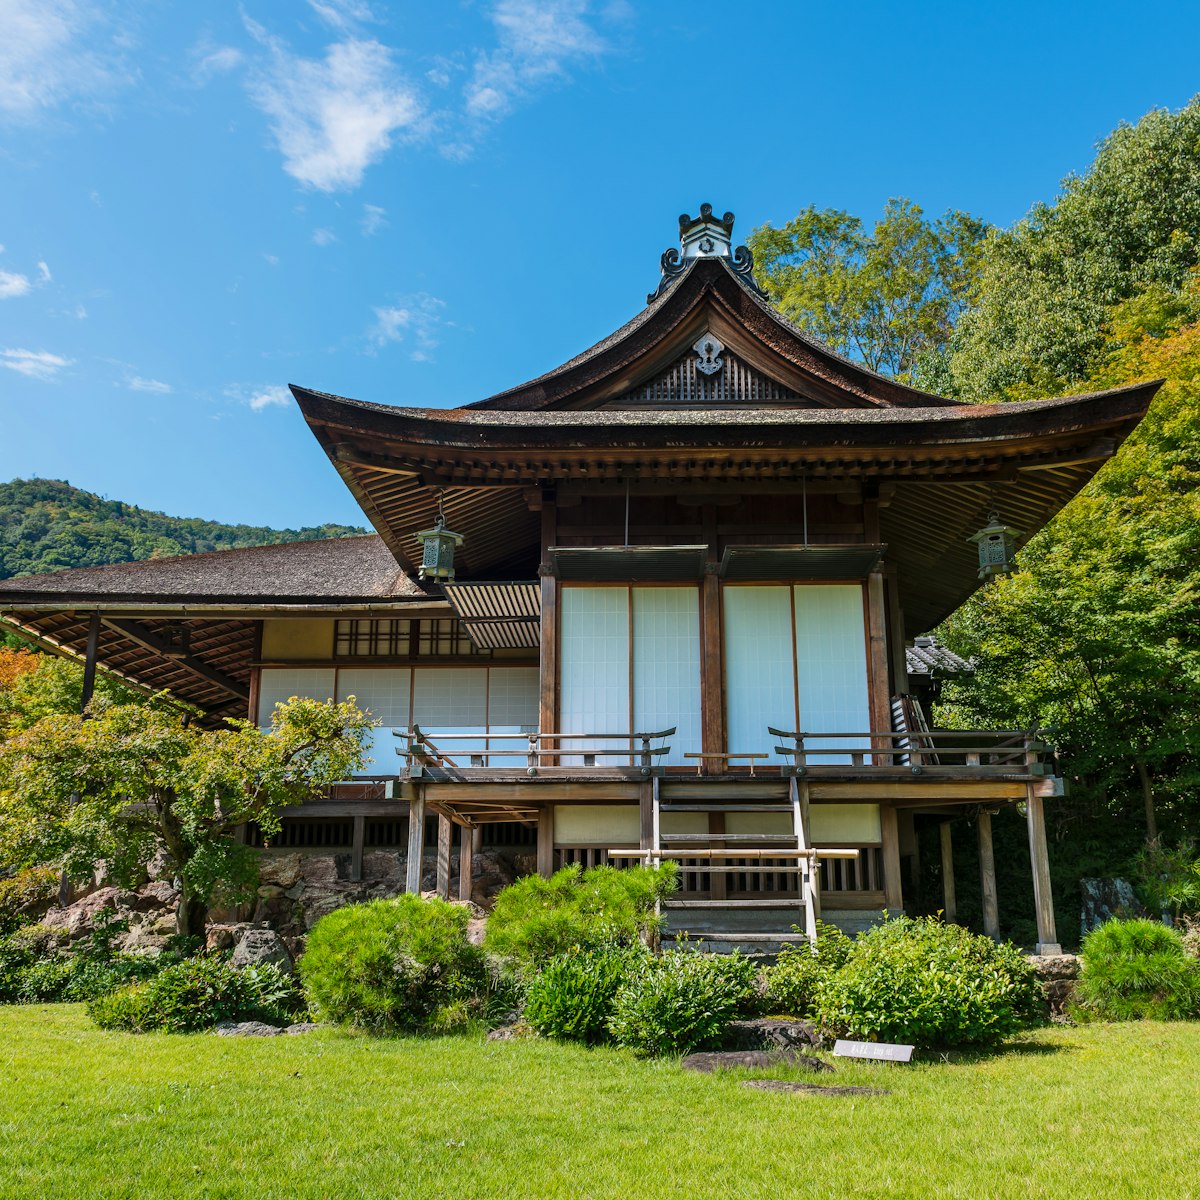 500745590
2015; Arts Culture and Entertainment; Asia; Autumn; Buddha; Buddhism; Building Exterior; Built Structure; Bush; Cultures; East Asian Culture; Famous Place; Foliage; Forest; Formal Garden; Grass; Green Color; Higashiyama-ku - Kyoto; History; Holiday Villa; Horizontal; House; Japan; Japanese Culture; Japanese Garden; Katsura; Kyoto City; Kyoto Prefecture; Leaf; Monument; Mountain; No People; Ornamental Garden; Outdoors; Photography; Pinaceae; Pine Tree; Place of Worship; Religion; Rinzai Zen Buddhism; Royalty; Shrine; Spirituality; Temple - Building; Travel; Travel locations; Tree; Villa; Wood - Material; Zen-like;
Kyoto, Japan - October 5, 2015: Japanese gardens and main house (Daijokaku) in the Okochi Sanso villa in Arashiyama, Kyoto, the former home and garden of the Japanese period film amor Denjiro Okochi.